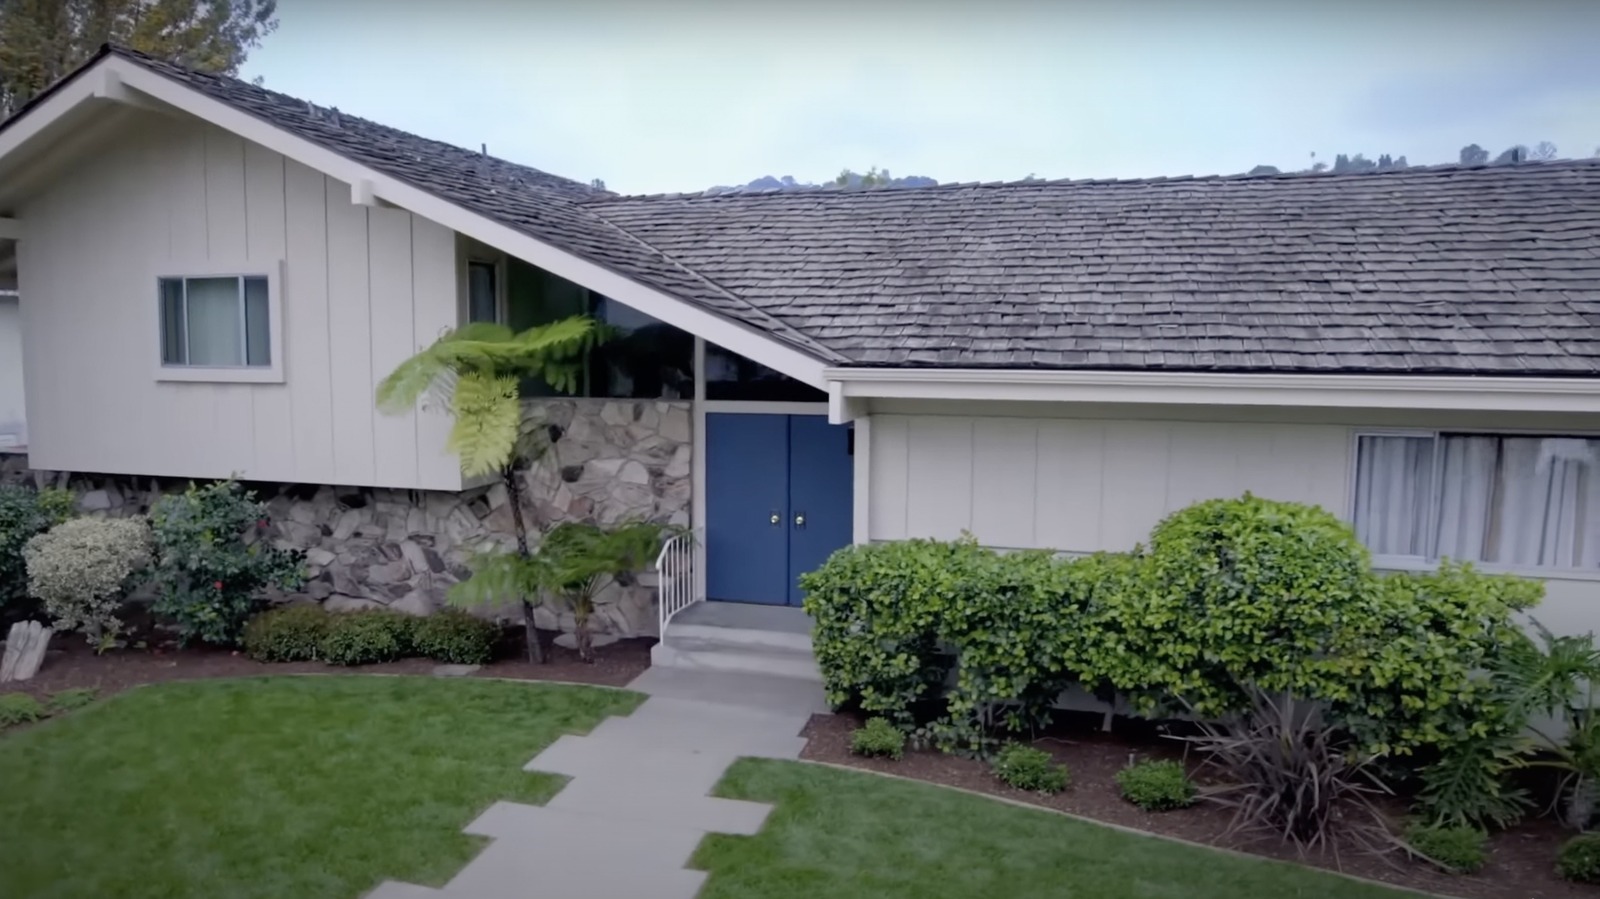 How HGTV's Renovated Brady Bunch House Became One Of The Hottest Homes